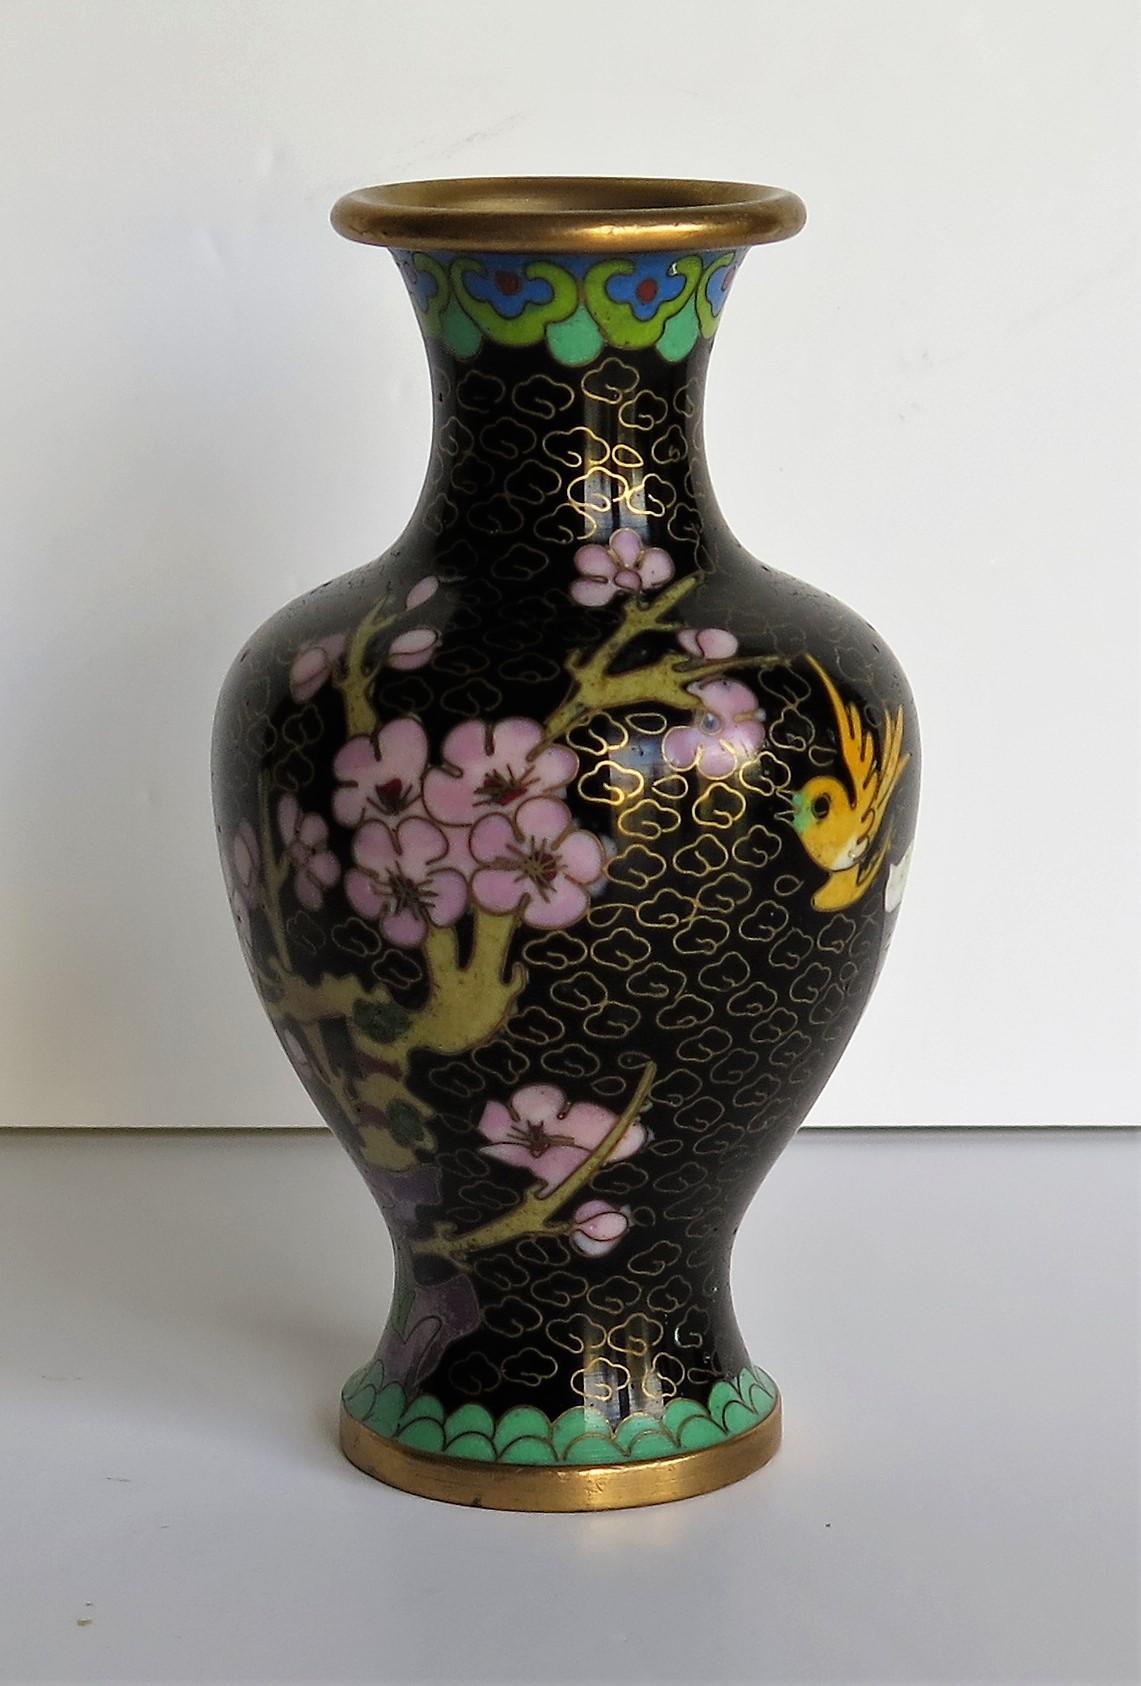 This is a very decorative cloisonné vase, made in China and dating to the mid-20th century.

The vase has a good baluster shape. It is beautifully made of a bronze alloy with rich colorful enamels, set into a black ground.

The decoration shows